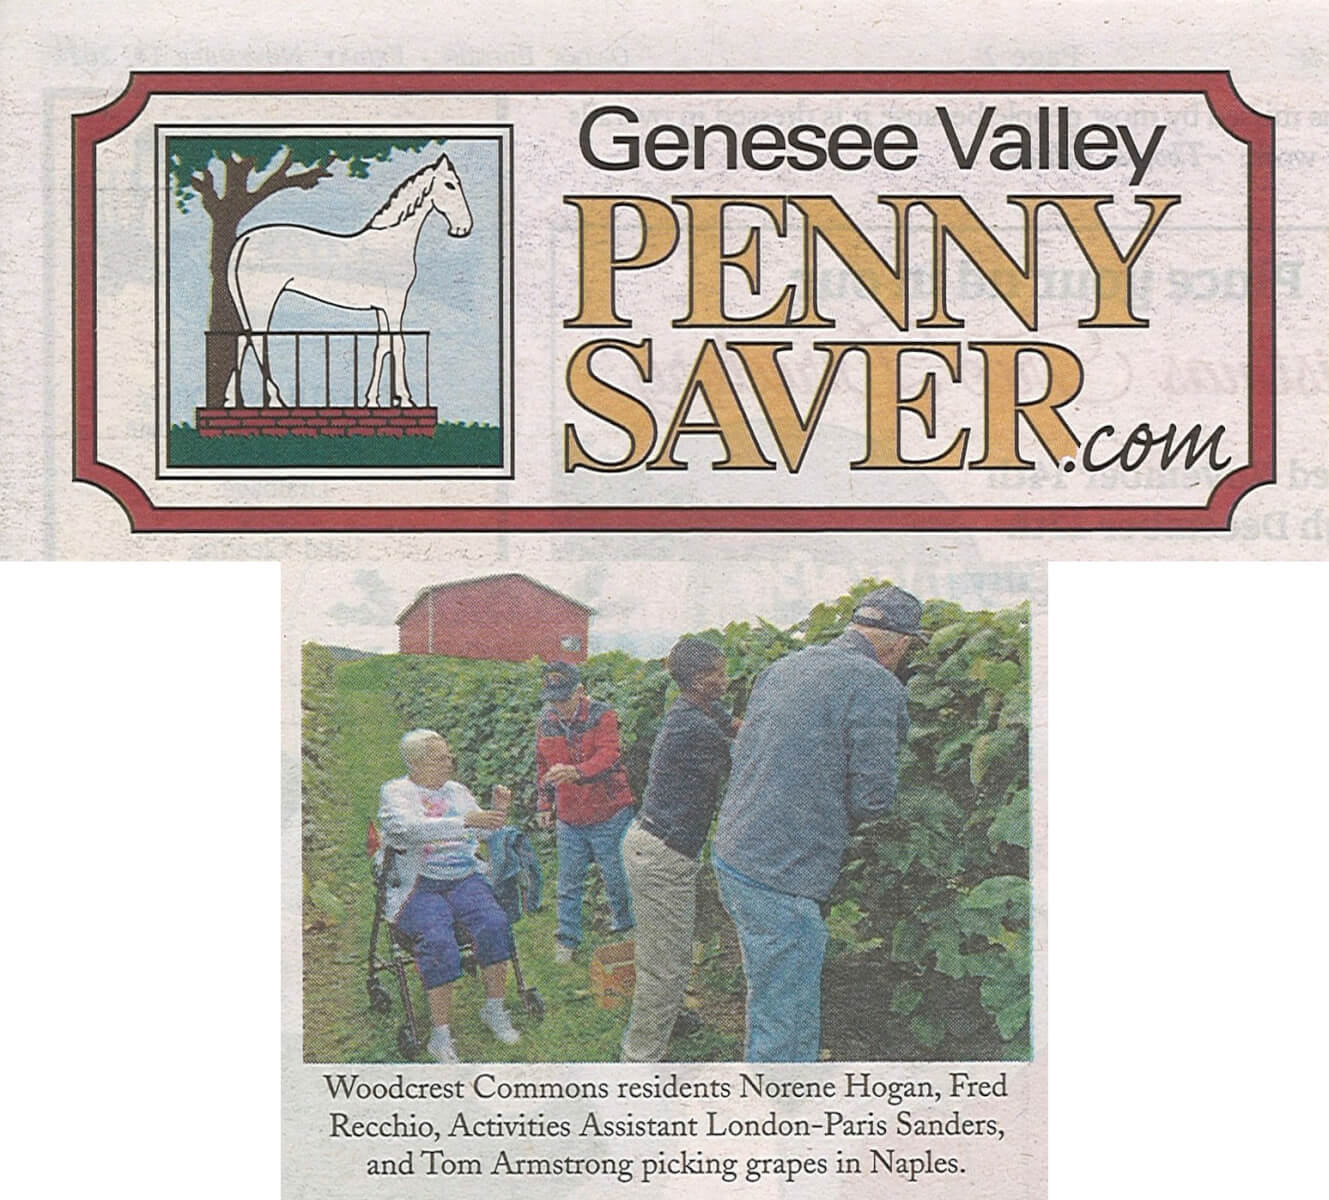 Woodcrest Commons Flavors of Fall, in the Genesee Valley Penny Saver November 14, 2014